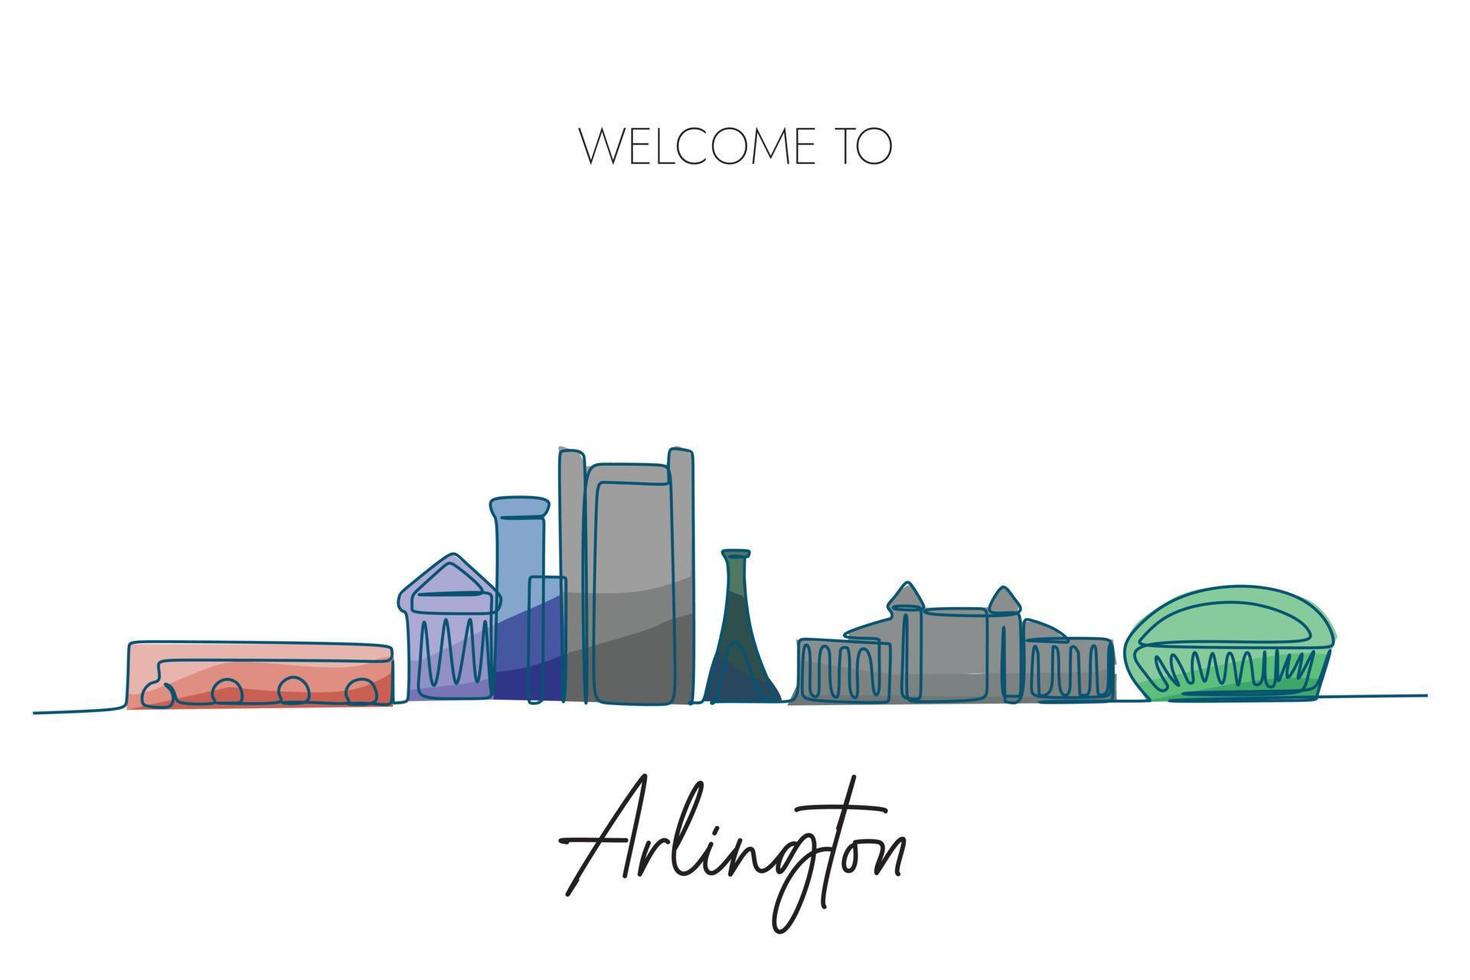 Arlington, USA city skyline continuous line drawing with monochromatic gradient colors. Hand drawn vector illustration.